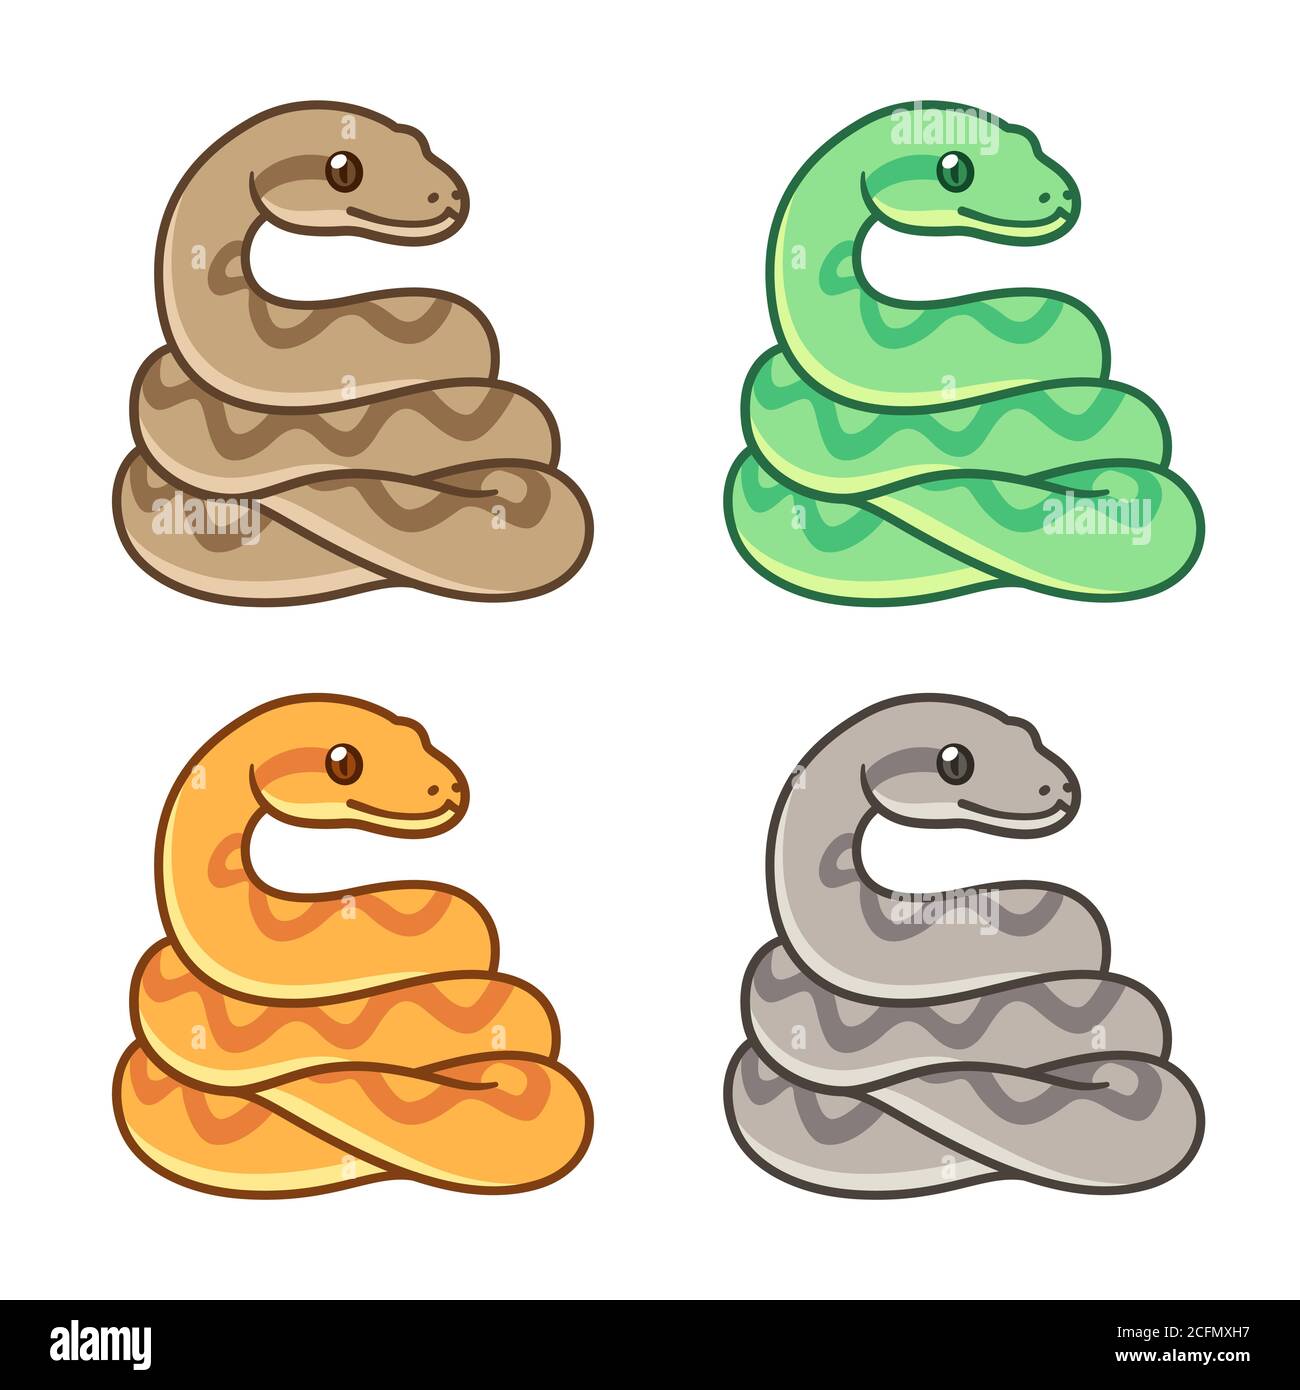 Cute cartoon snake drawing set, different colors. Ball python, boa ...